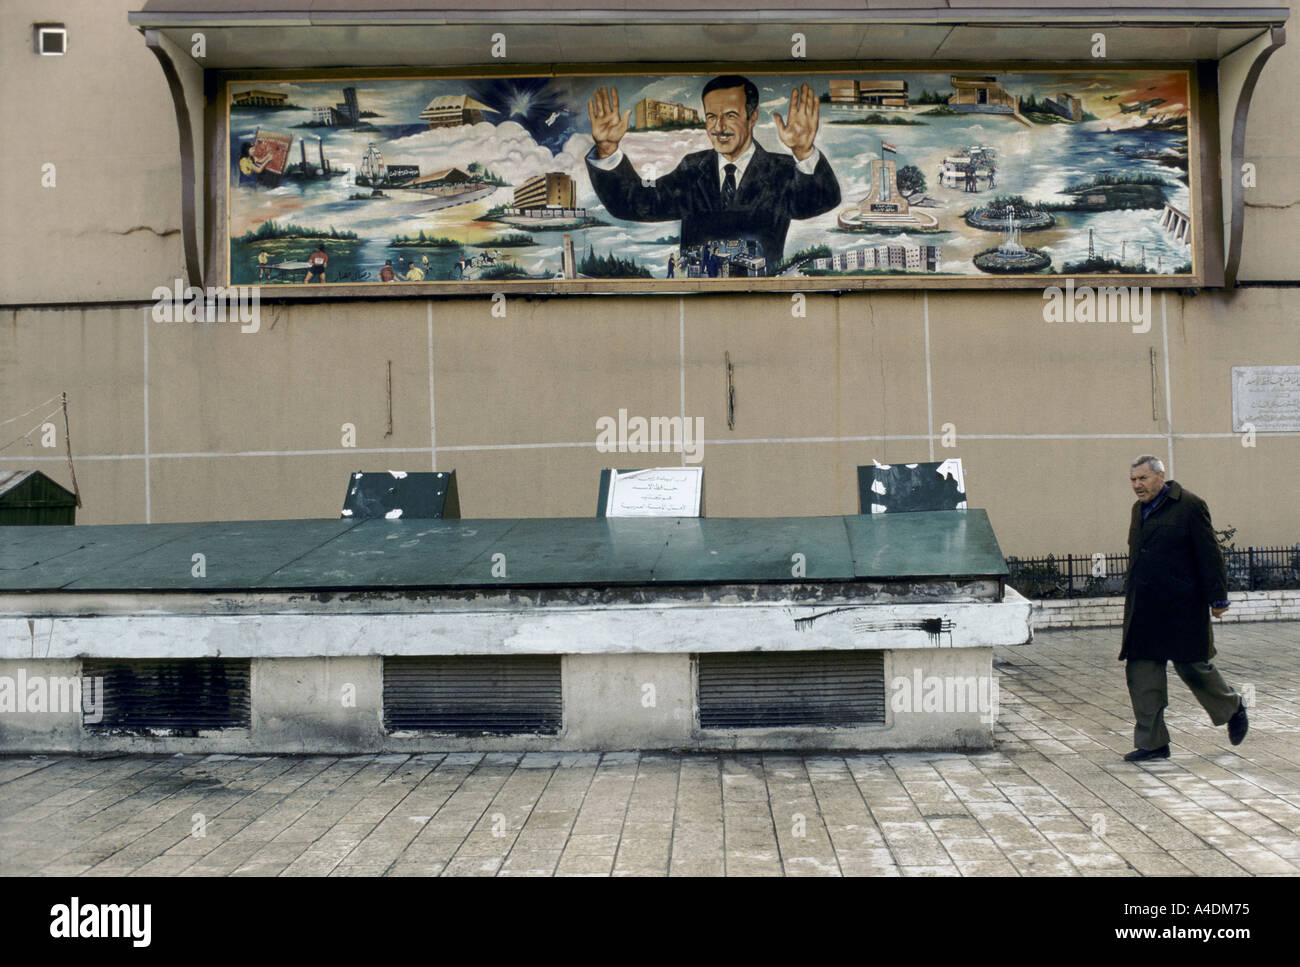 The personality cult of Assad. A man walking past a mural of Assad during the referendum campaign damascus december 1991 Stock Photo